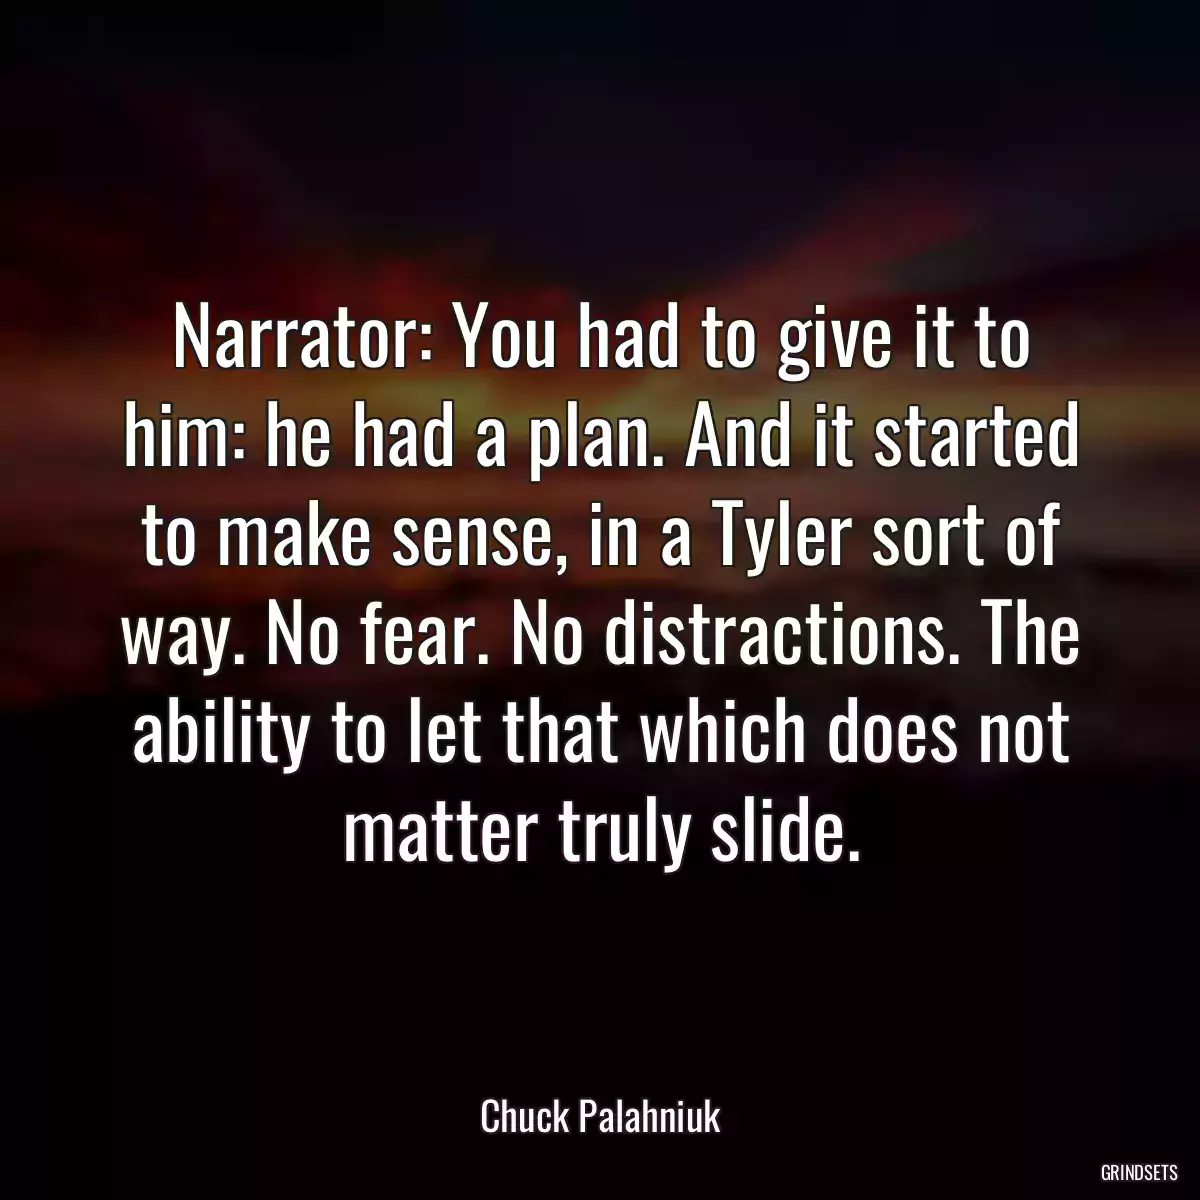 Narrator: You had to give it to him: he had a plan. And it started to make sense, in a Tyler sort of way. No fear. No distractions. The ability to let that which does not matter truly slide.